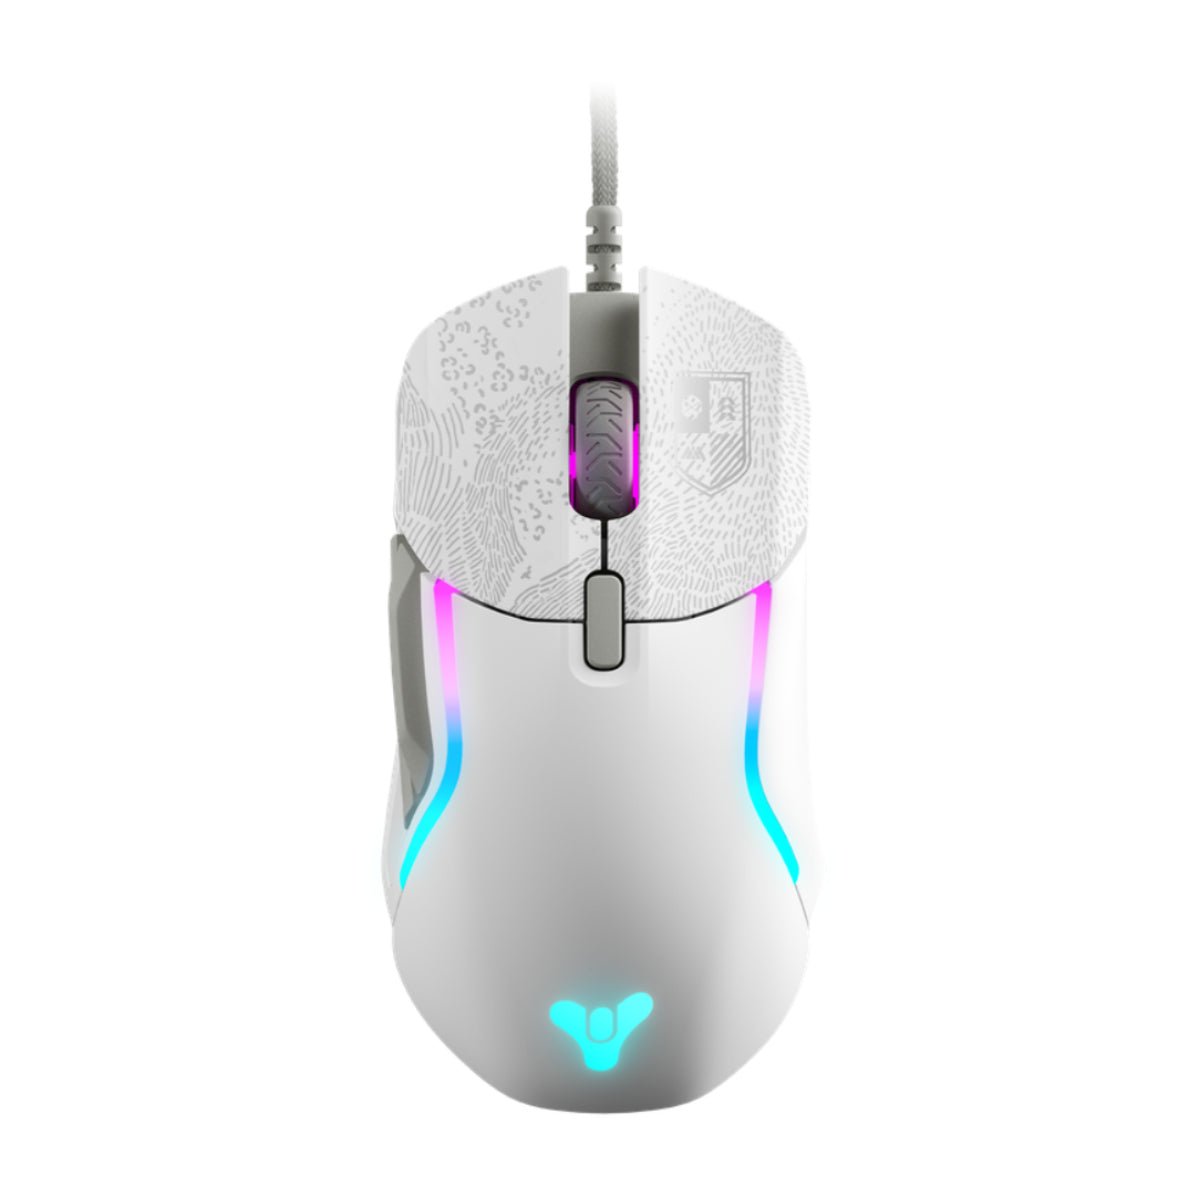 Rival 5 Destiny 2 Edition Ergonomic Wired Gaming Mouse - Store 974 | ستور ٩٧٤